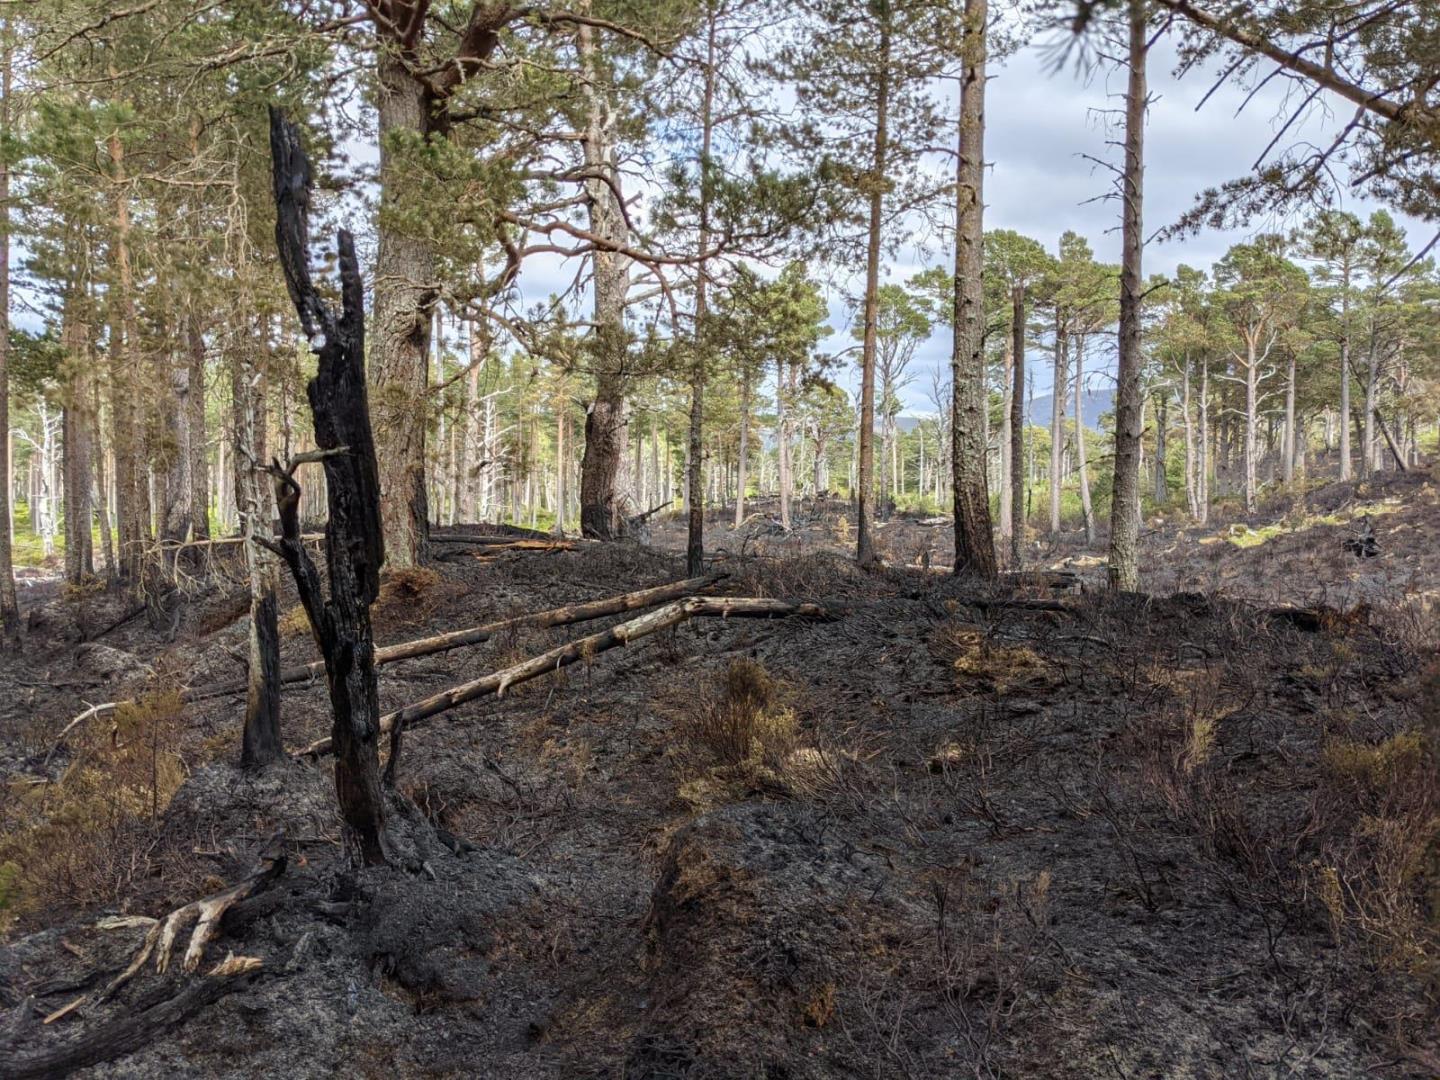 Wildfire damage in a woodland at Loch Morlich, after a preventable fire raged out of control in June 2021. 